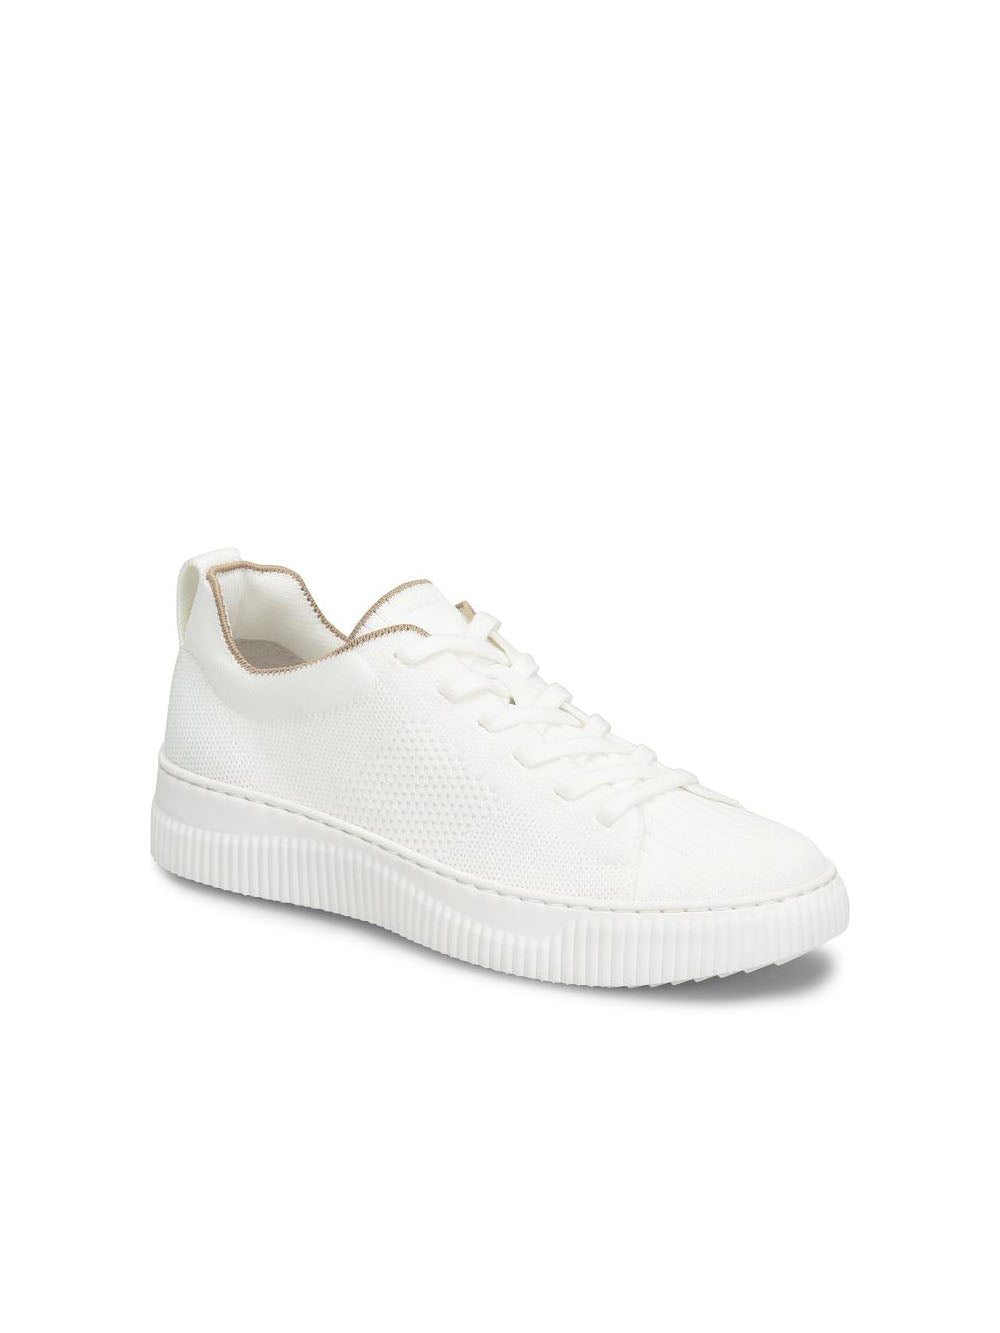 sofft shoes faro knit mesh sneaker in white